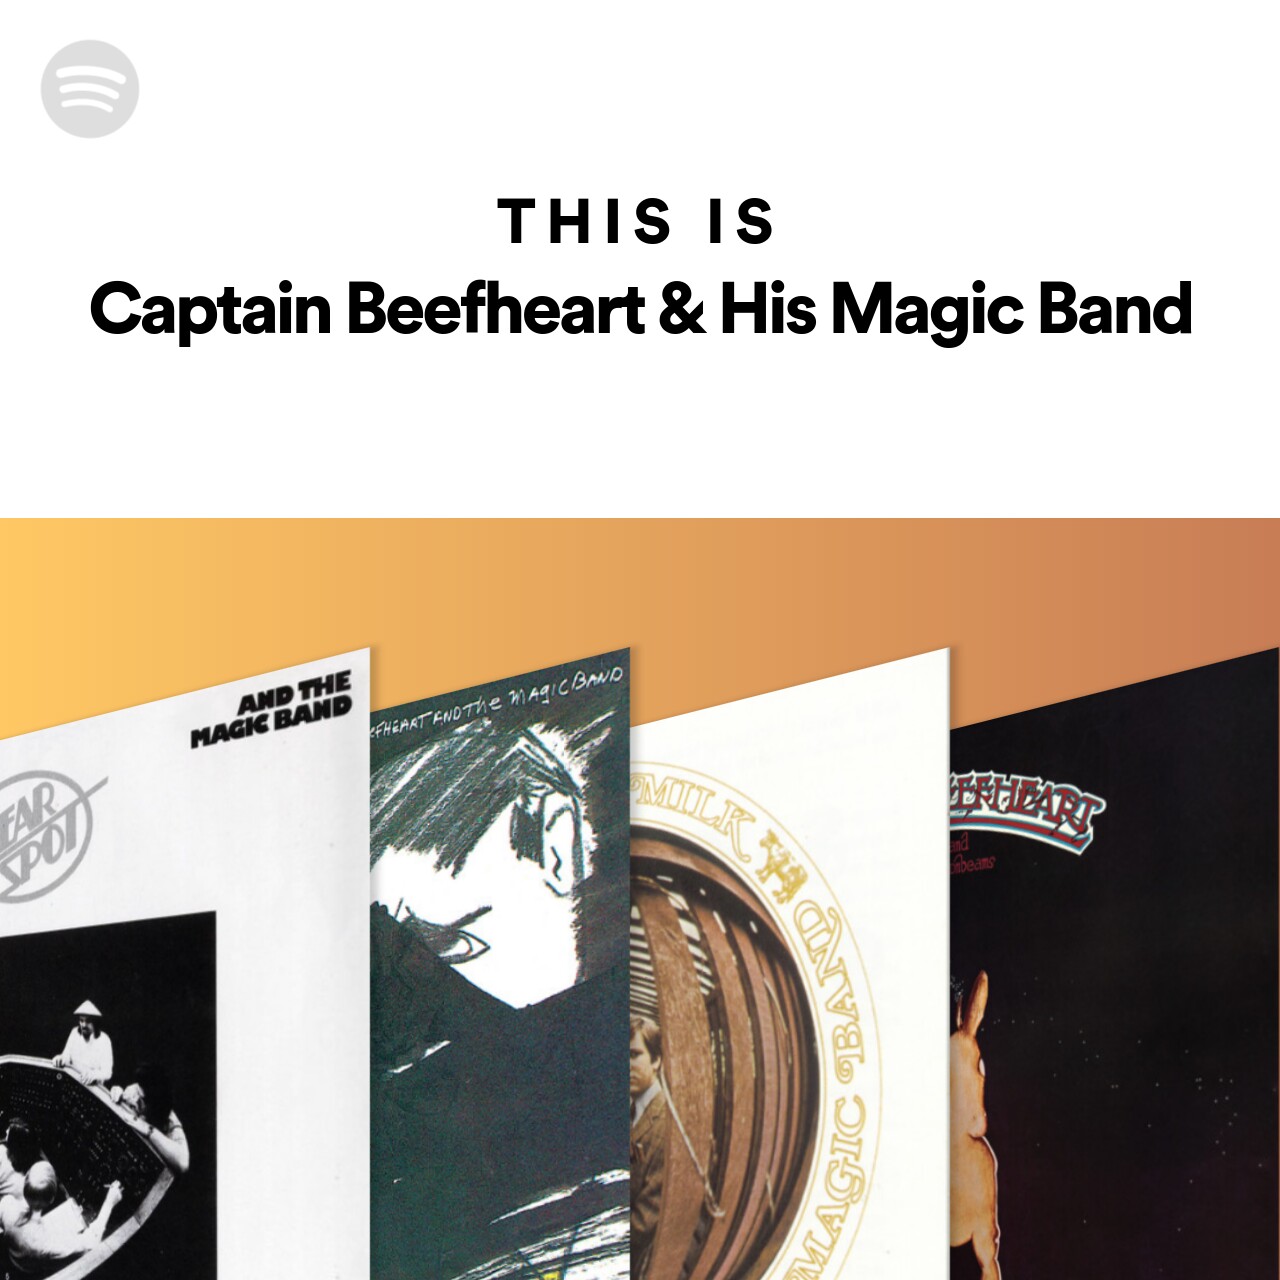 This Is Captain Beefheart & His Magic Band